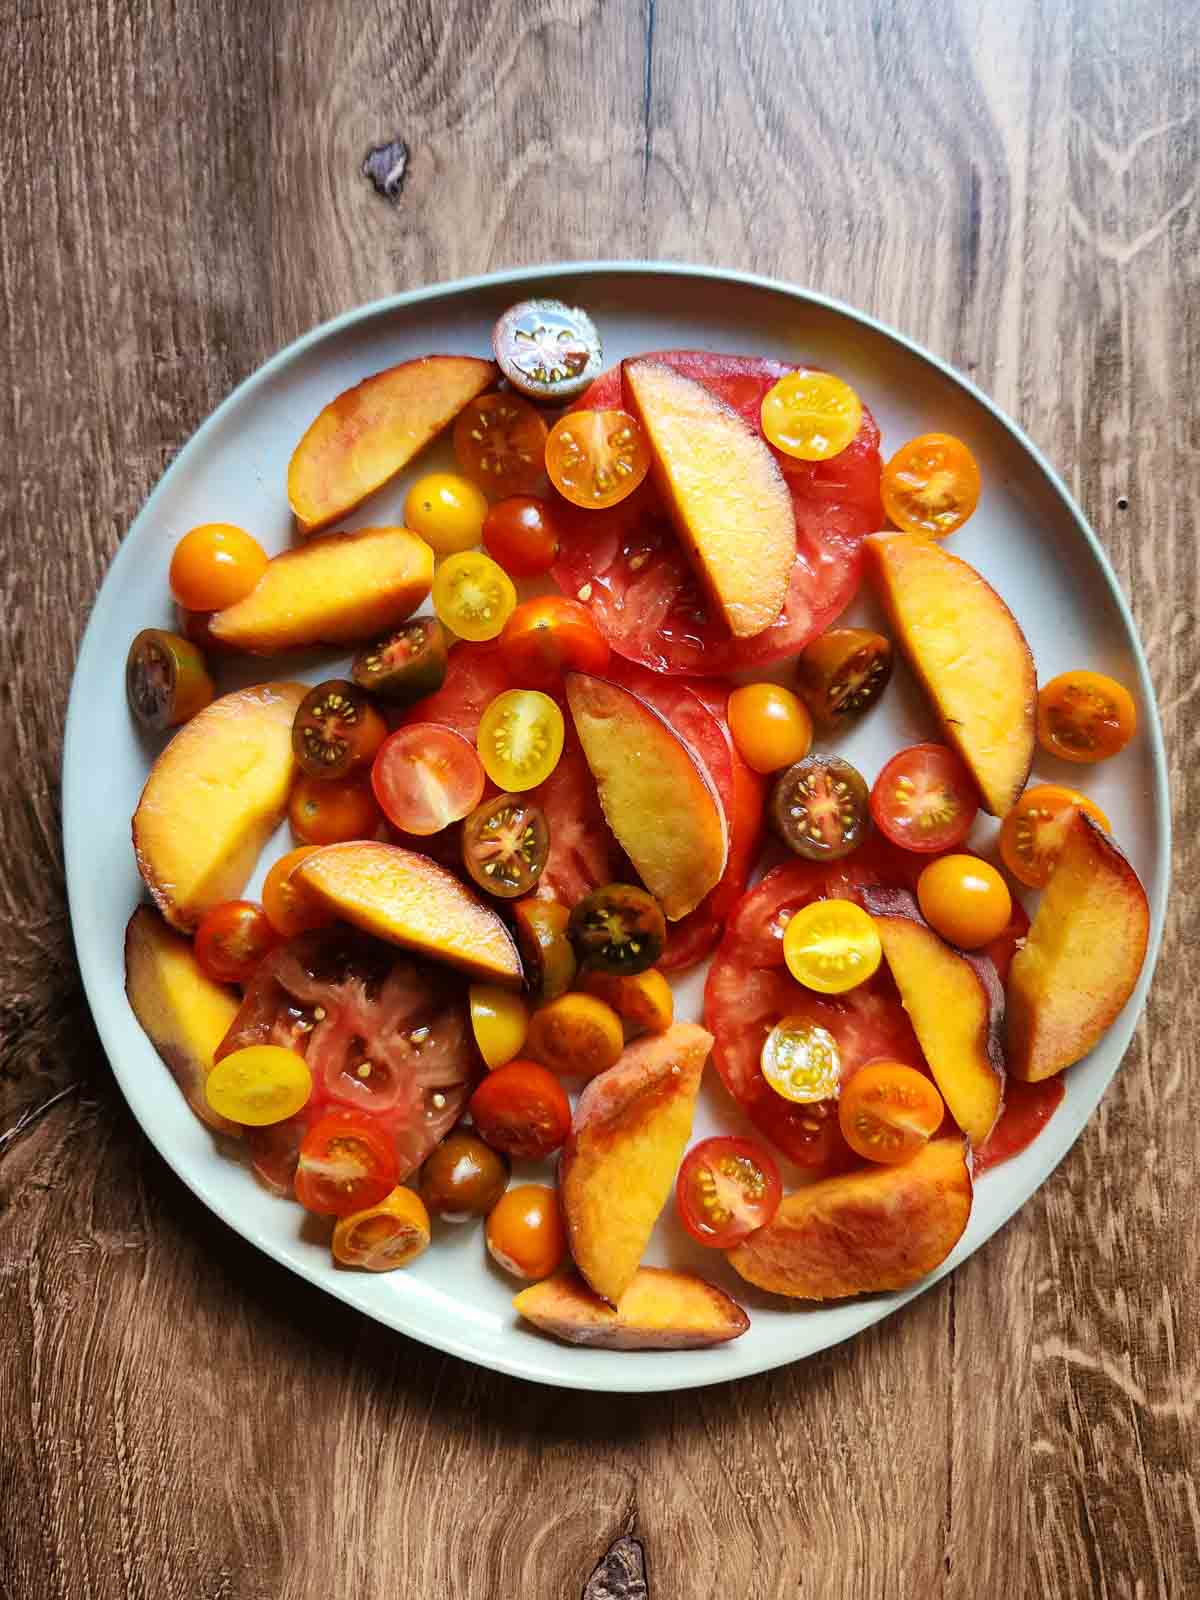 Tomatoes and peaches on a salad plate.